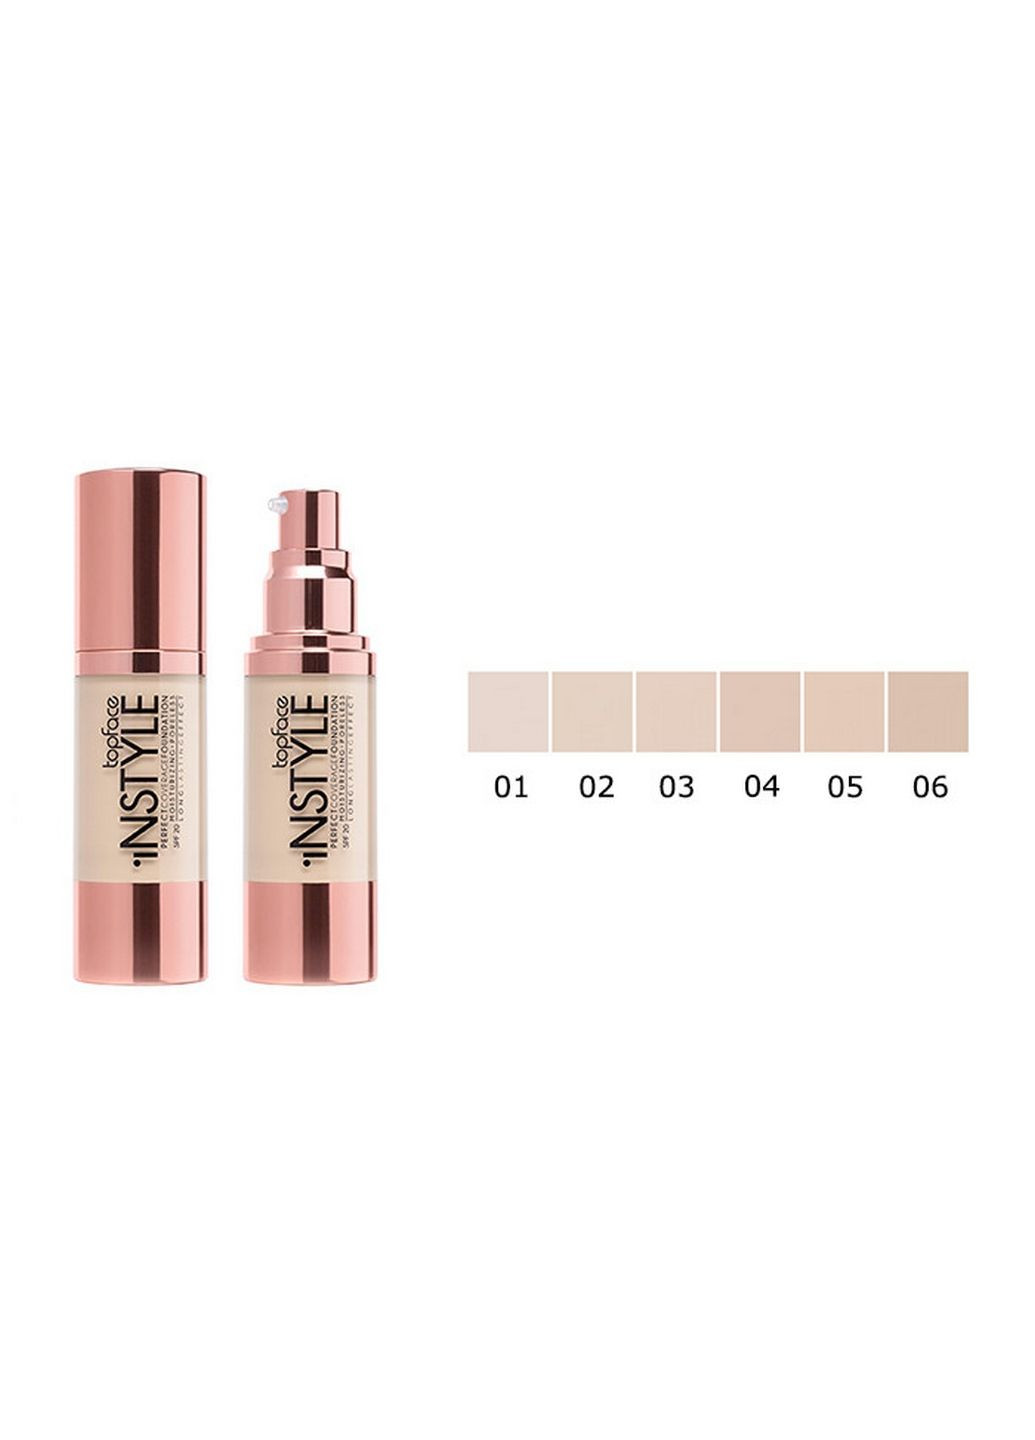 Основа тональная instyle perfect coverage spf20, № 05 sand beige TopFace (282587114)